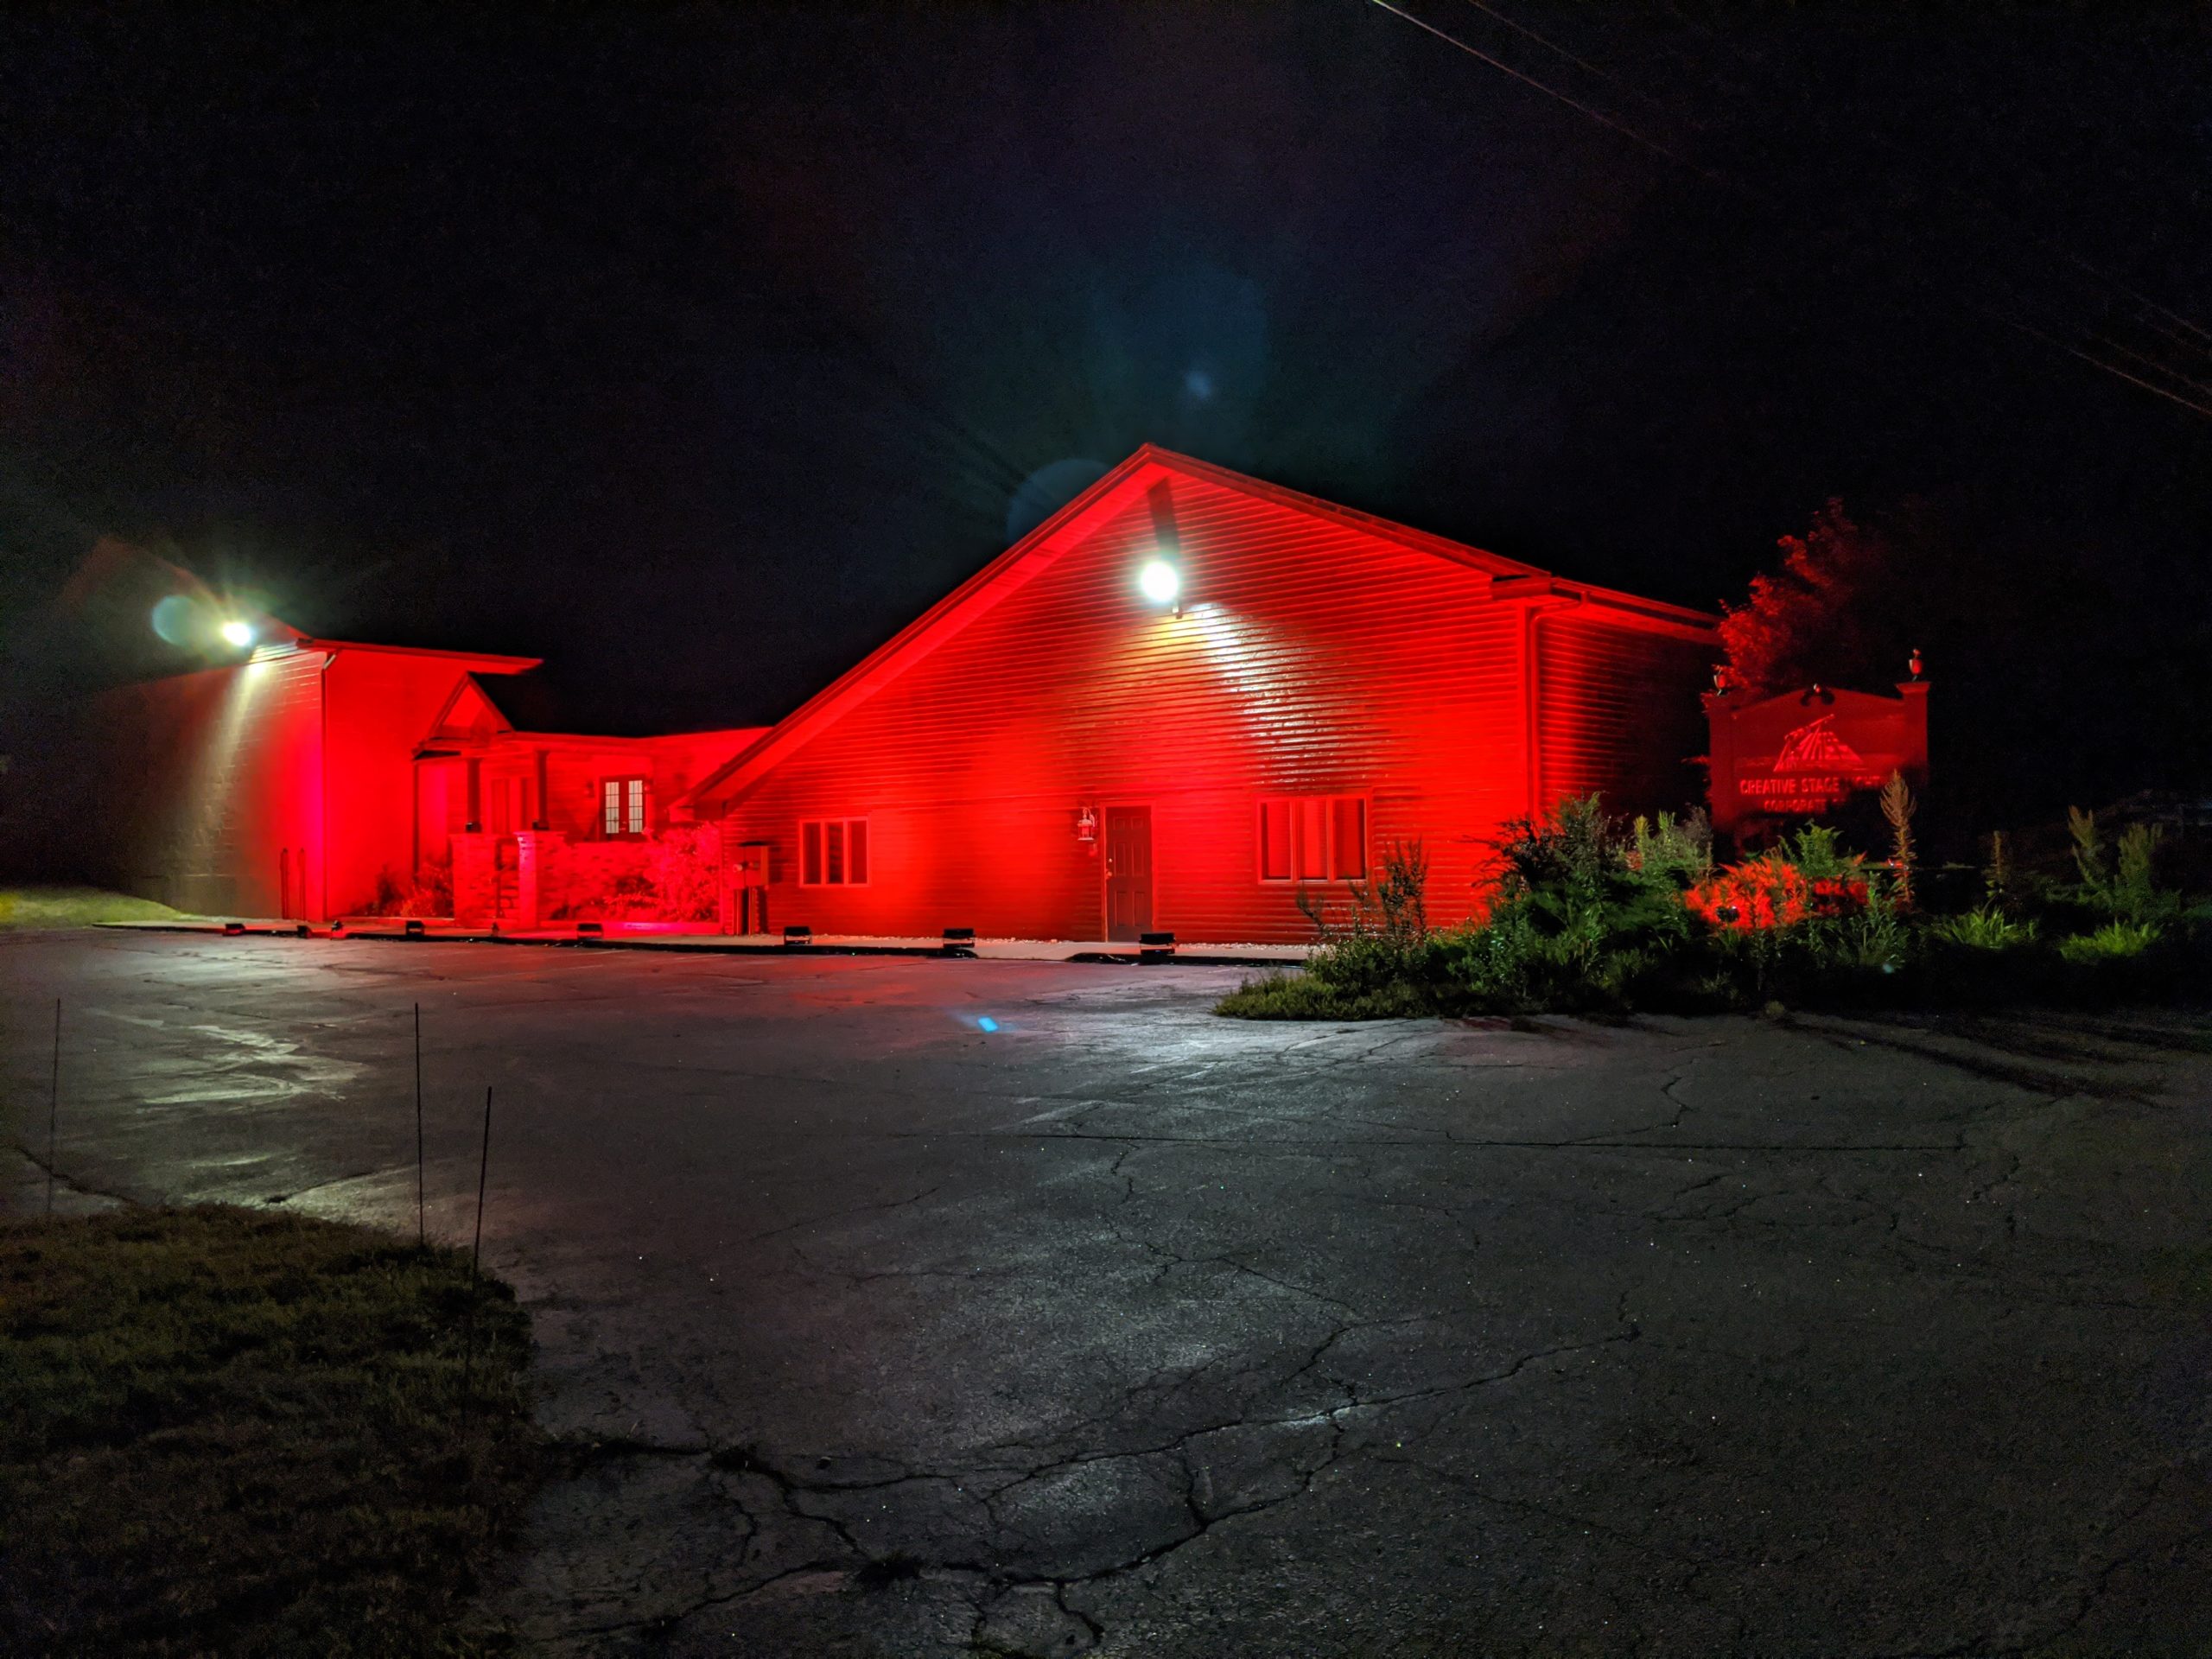 Creative Stage Lighting's North Creek, NY building lit red to support #WeMakeEvents, #redalertrestart, and #ExtendPUA